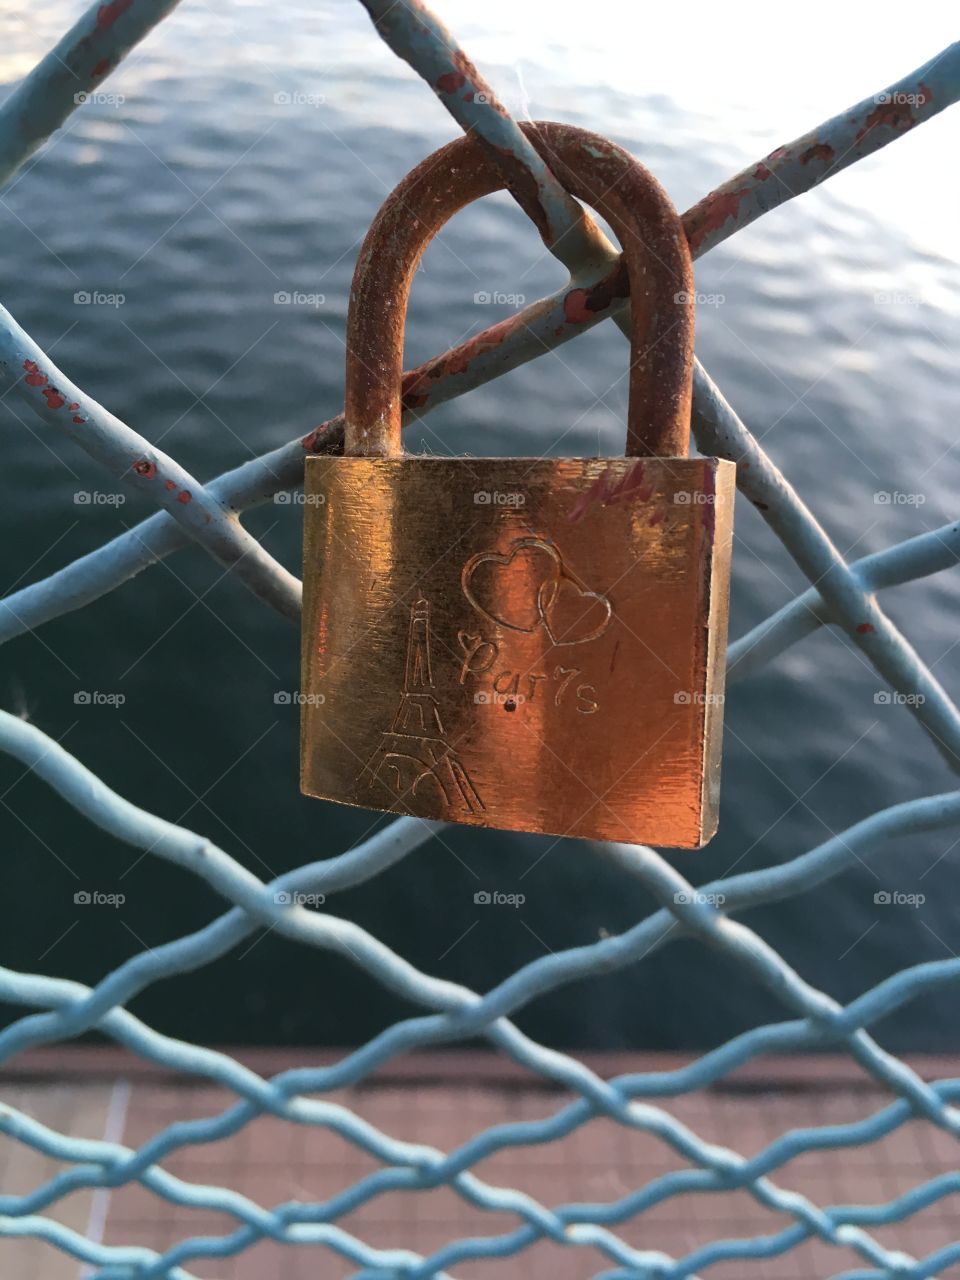 Found out the meaning of these locks being placed down at our pier. They Represent never ending love between couples. Paris is where it all began and this was my favorite lock I found!